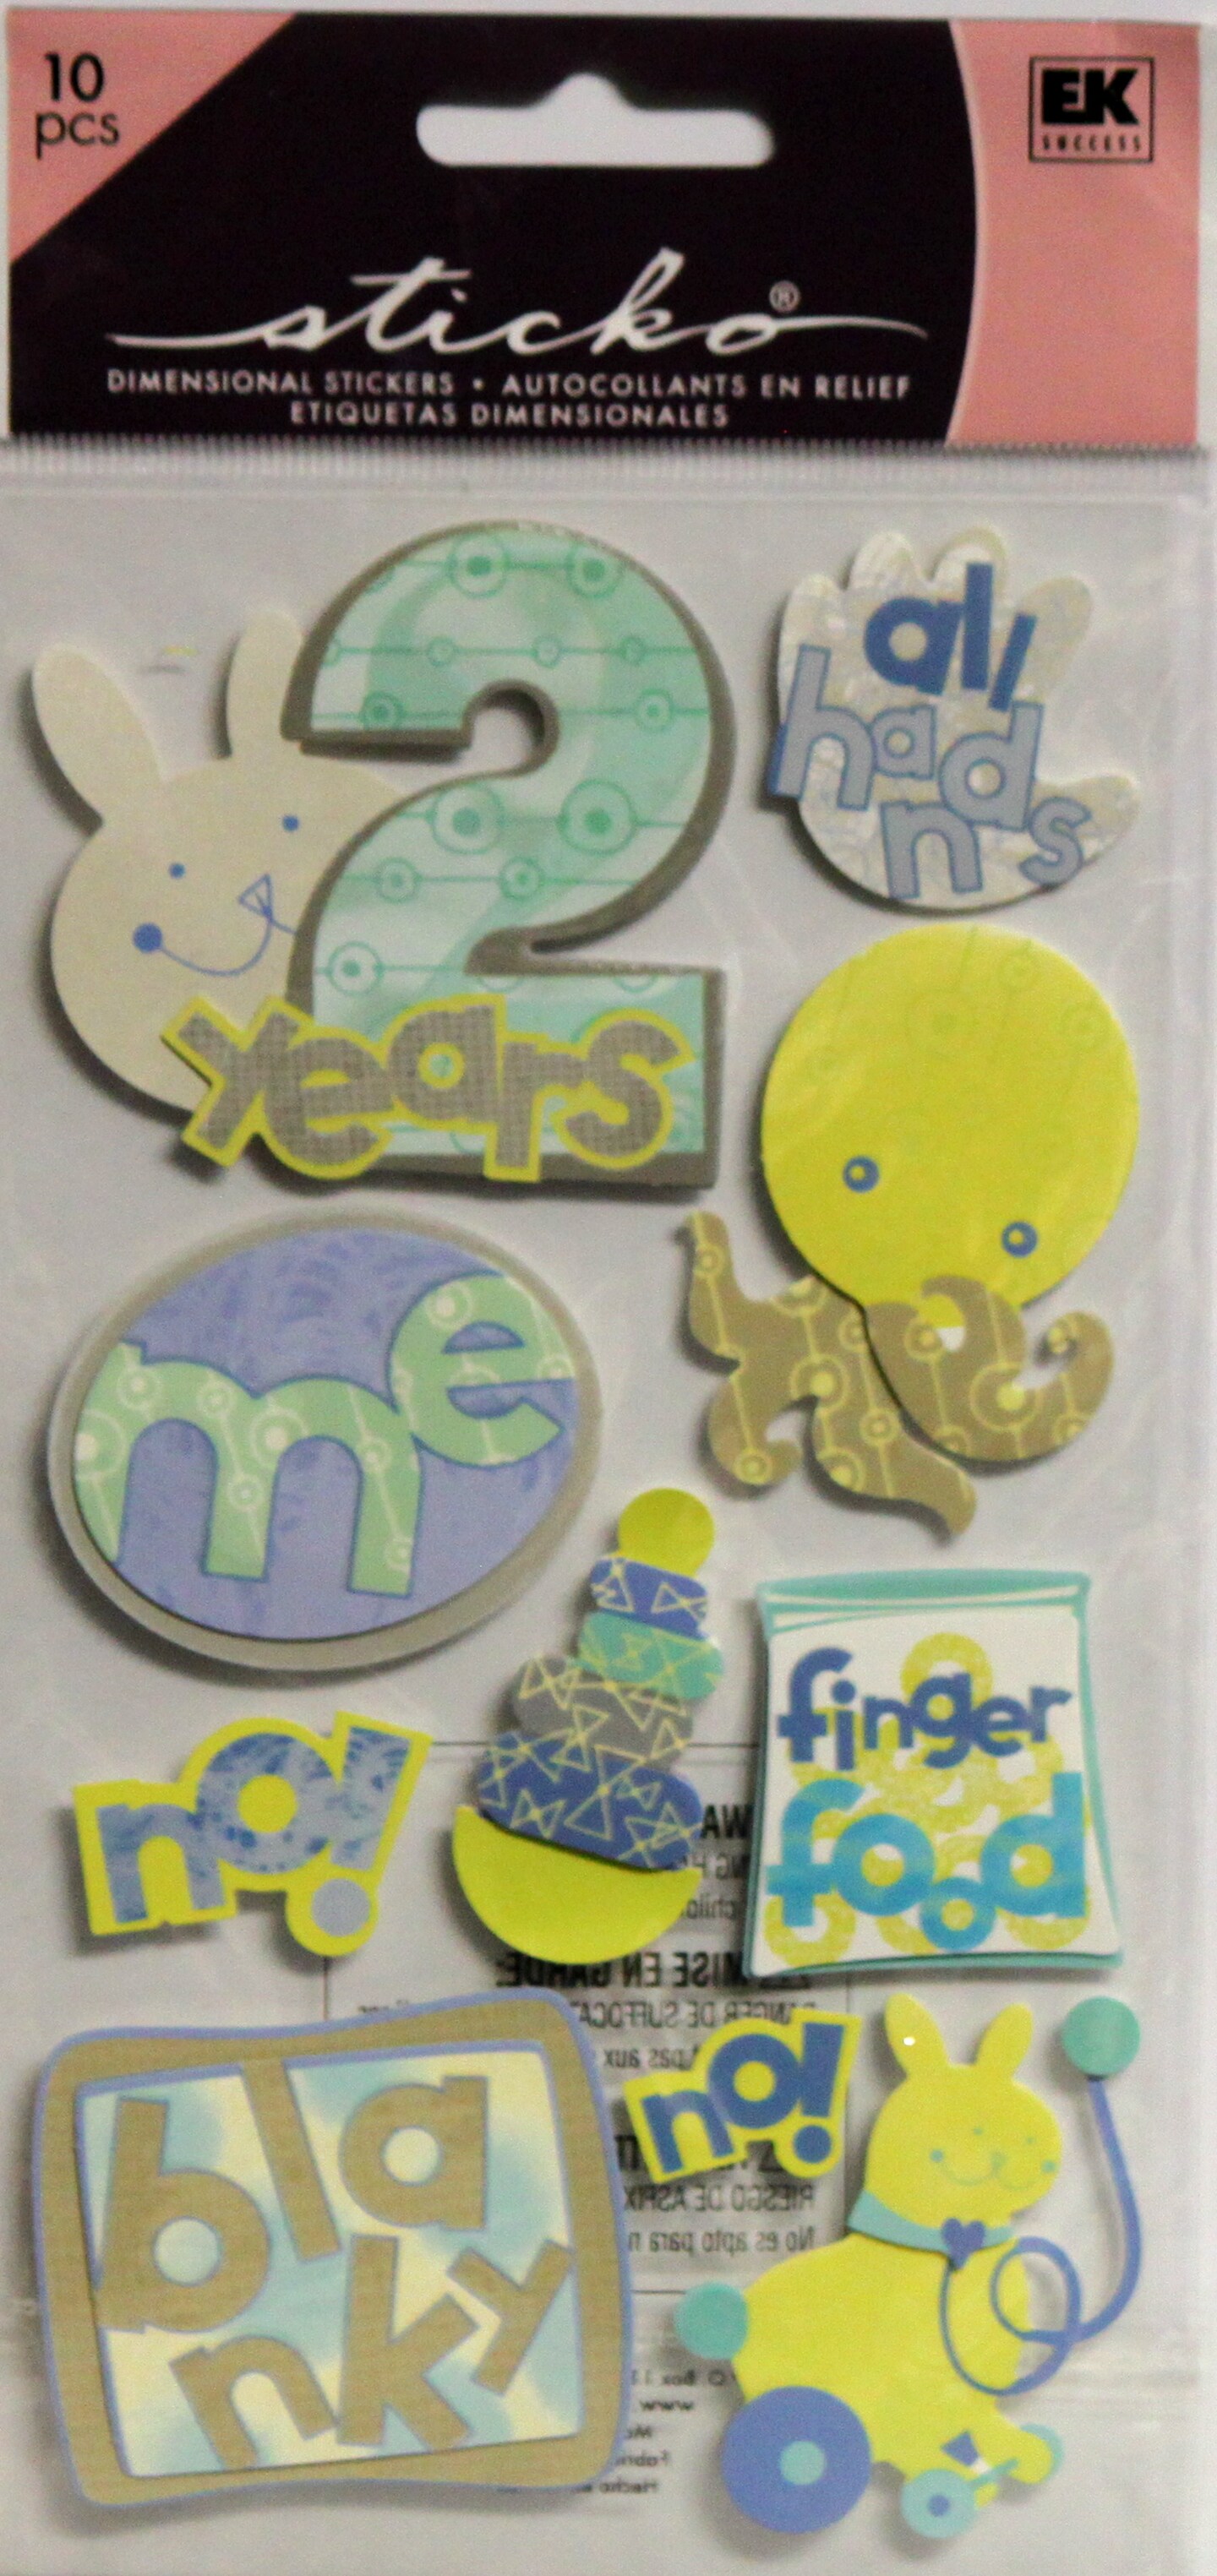 Sticko 2 Years Old Dimensional Stickers